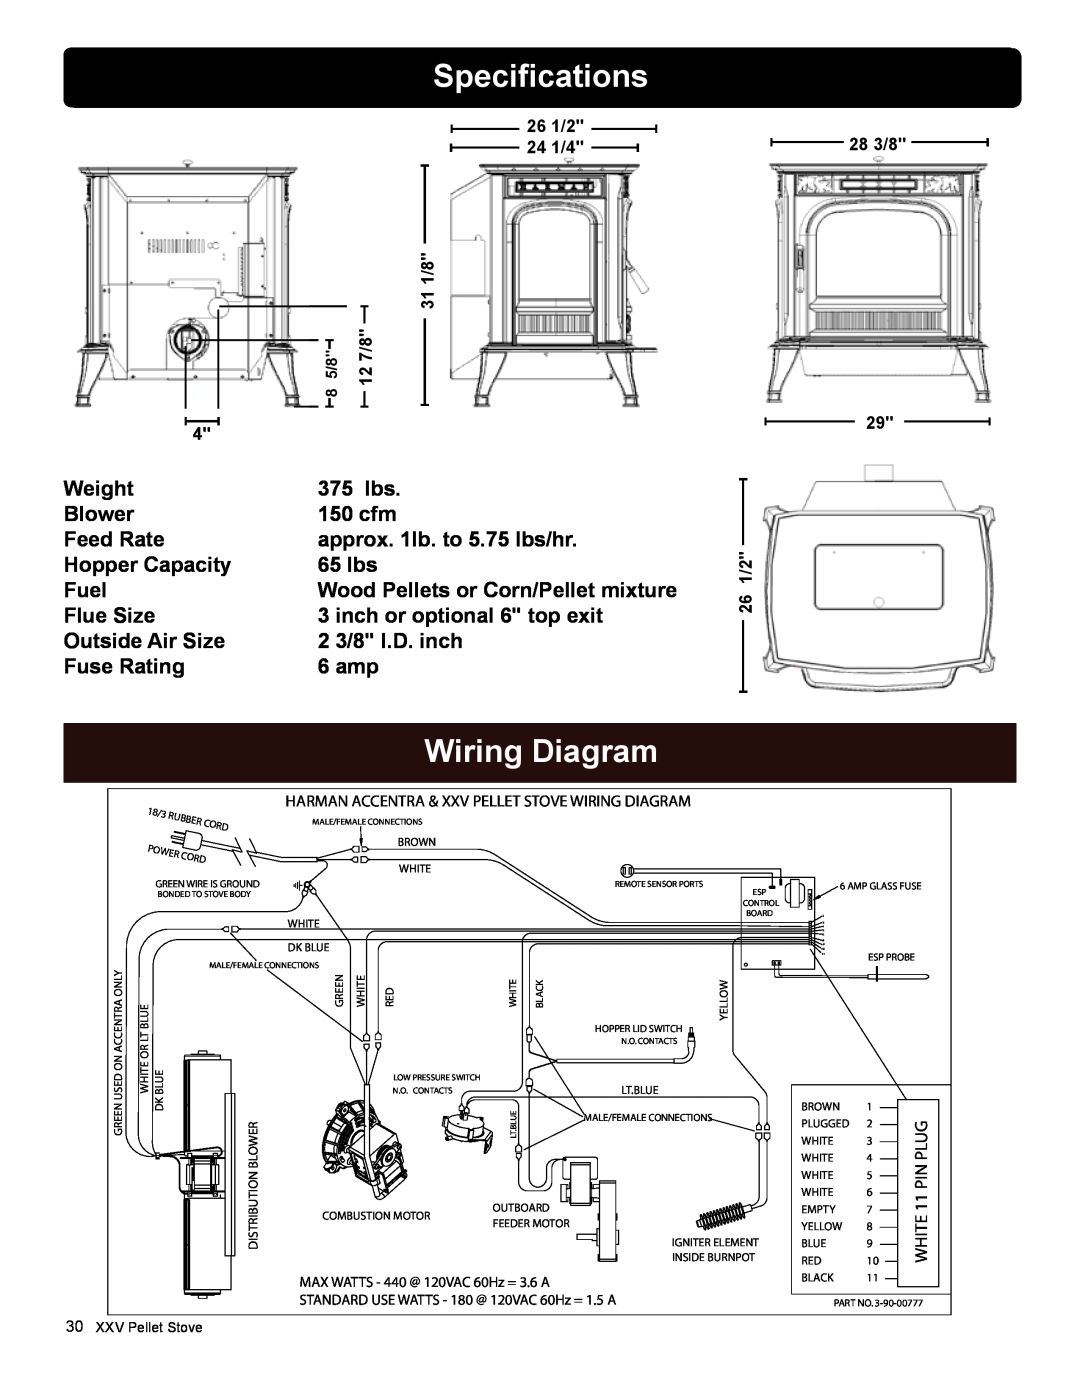 Harman Stove Company R16 manual Specifications, Wiring Diagram 